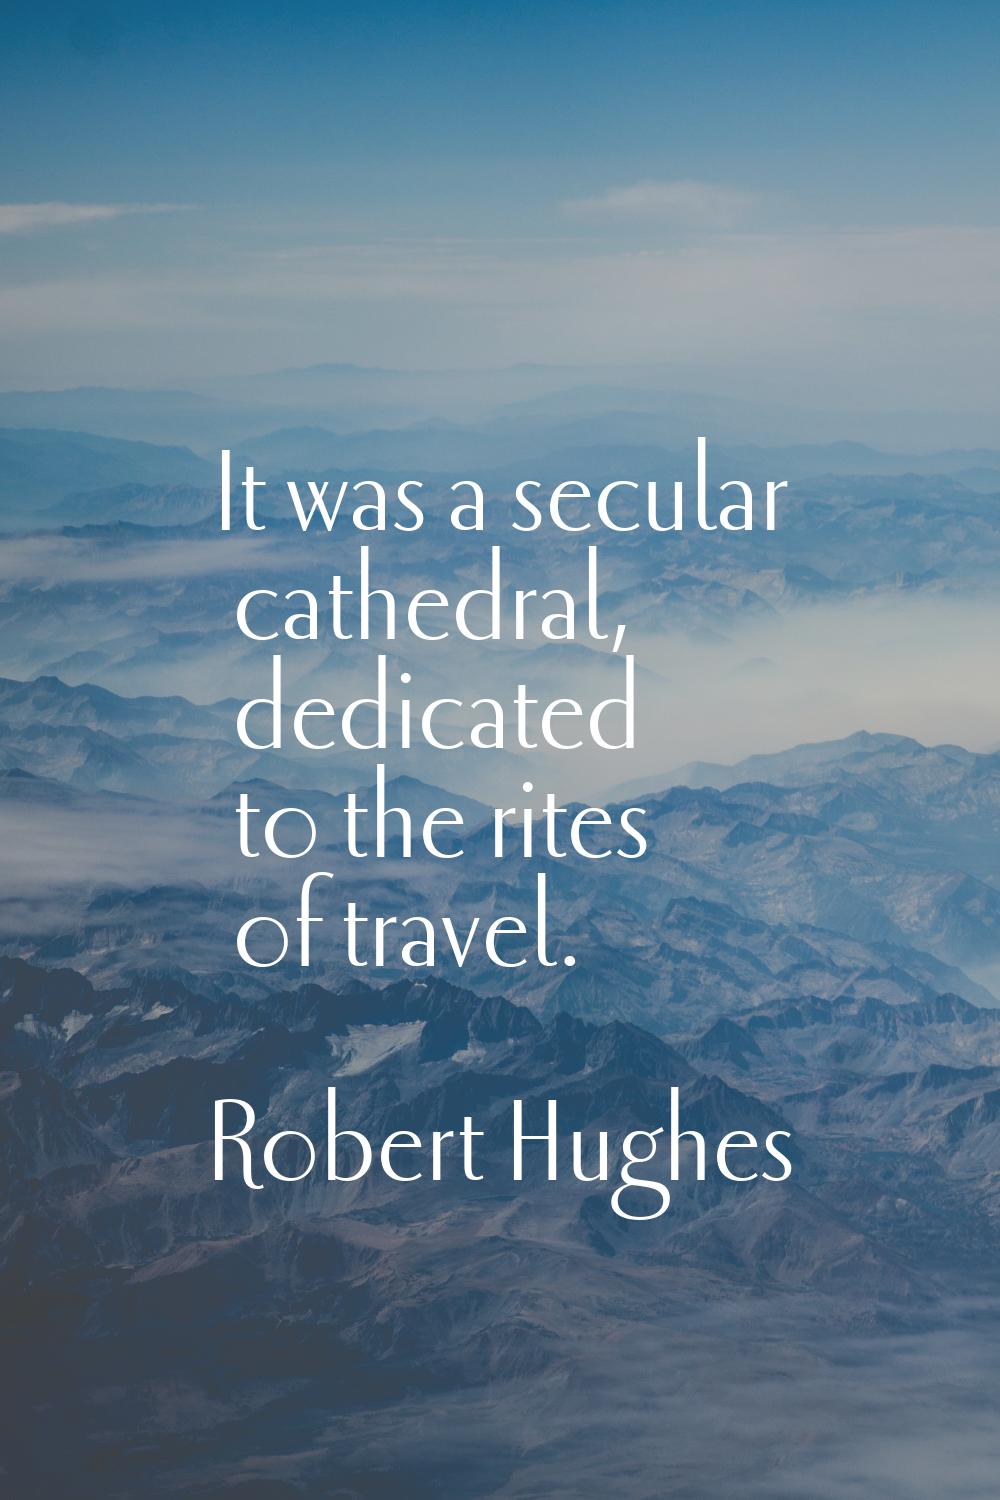 It was a secular cathedral, dedicated to the rites of travel.